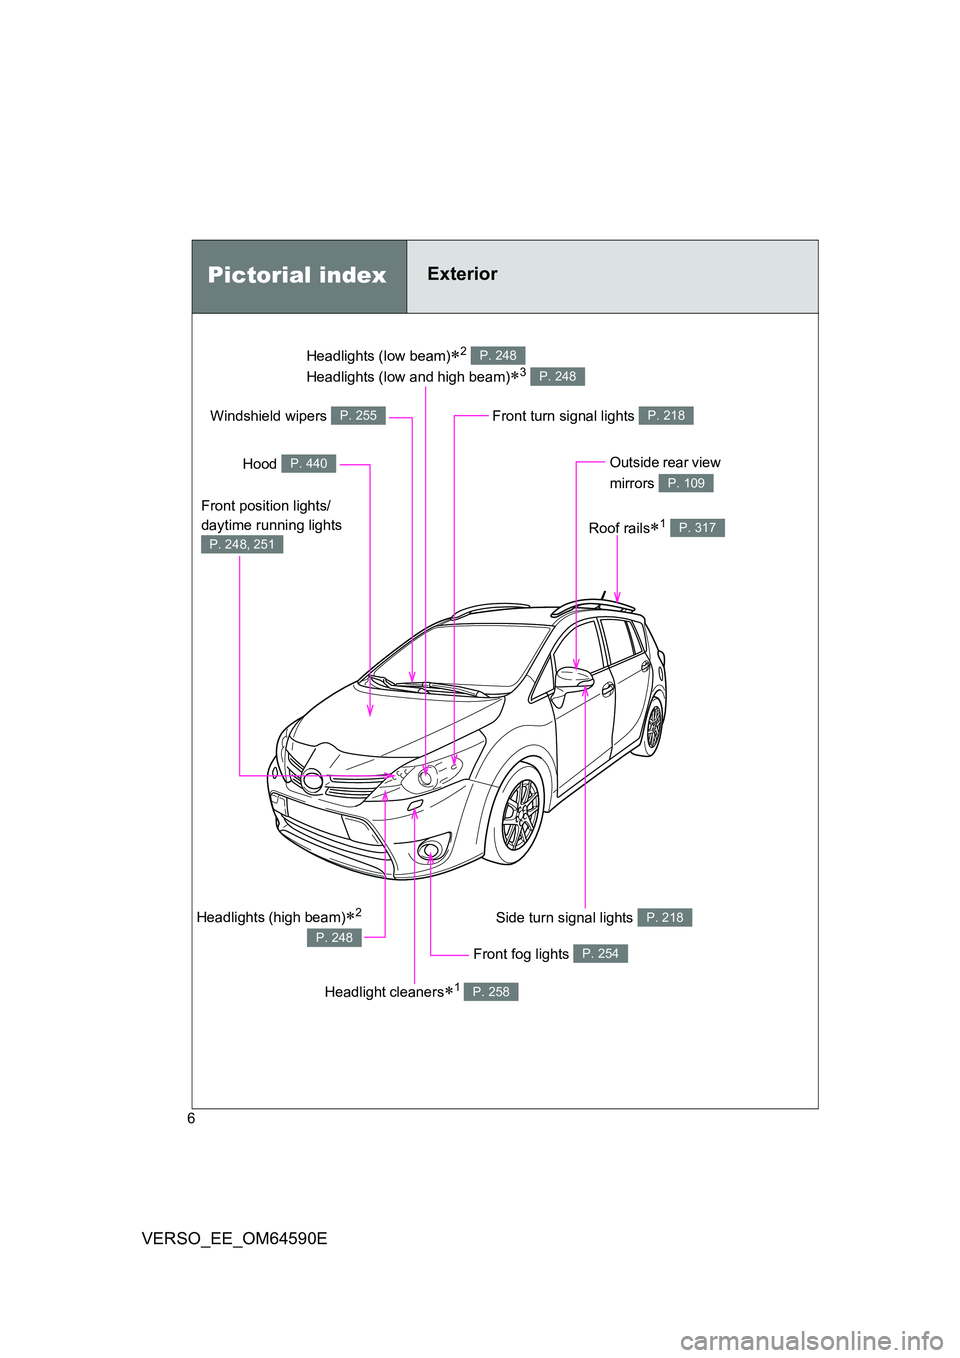 TOYOTA VERSO 2016  Owners Manual 6
VERSO_EE_OM64590E
Headlights (low beam)2  
Headlights (low and high beam)3 
P. 248
P. 248
Pictorial indexExterior
Front fog lights P. 254
Side turn signal lights P. 218
Hood P. 440
Windshield 